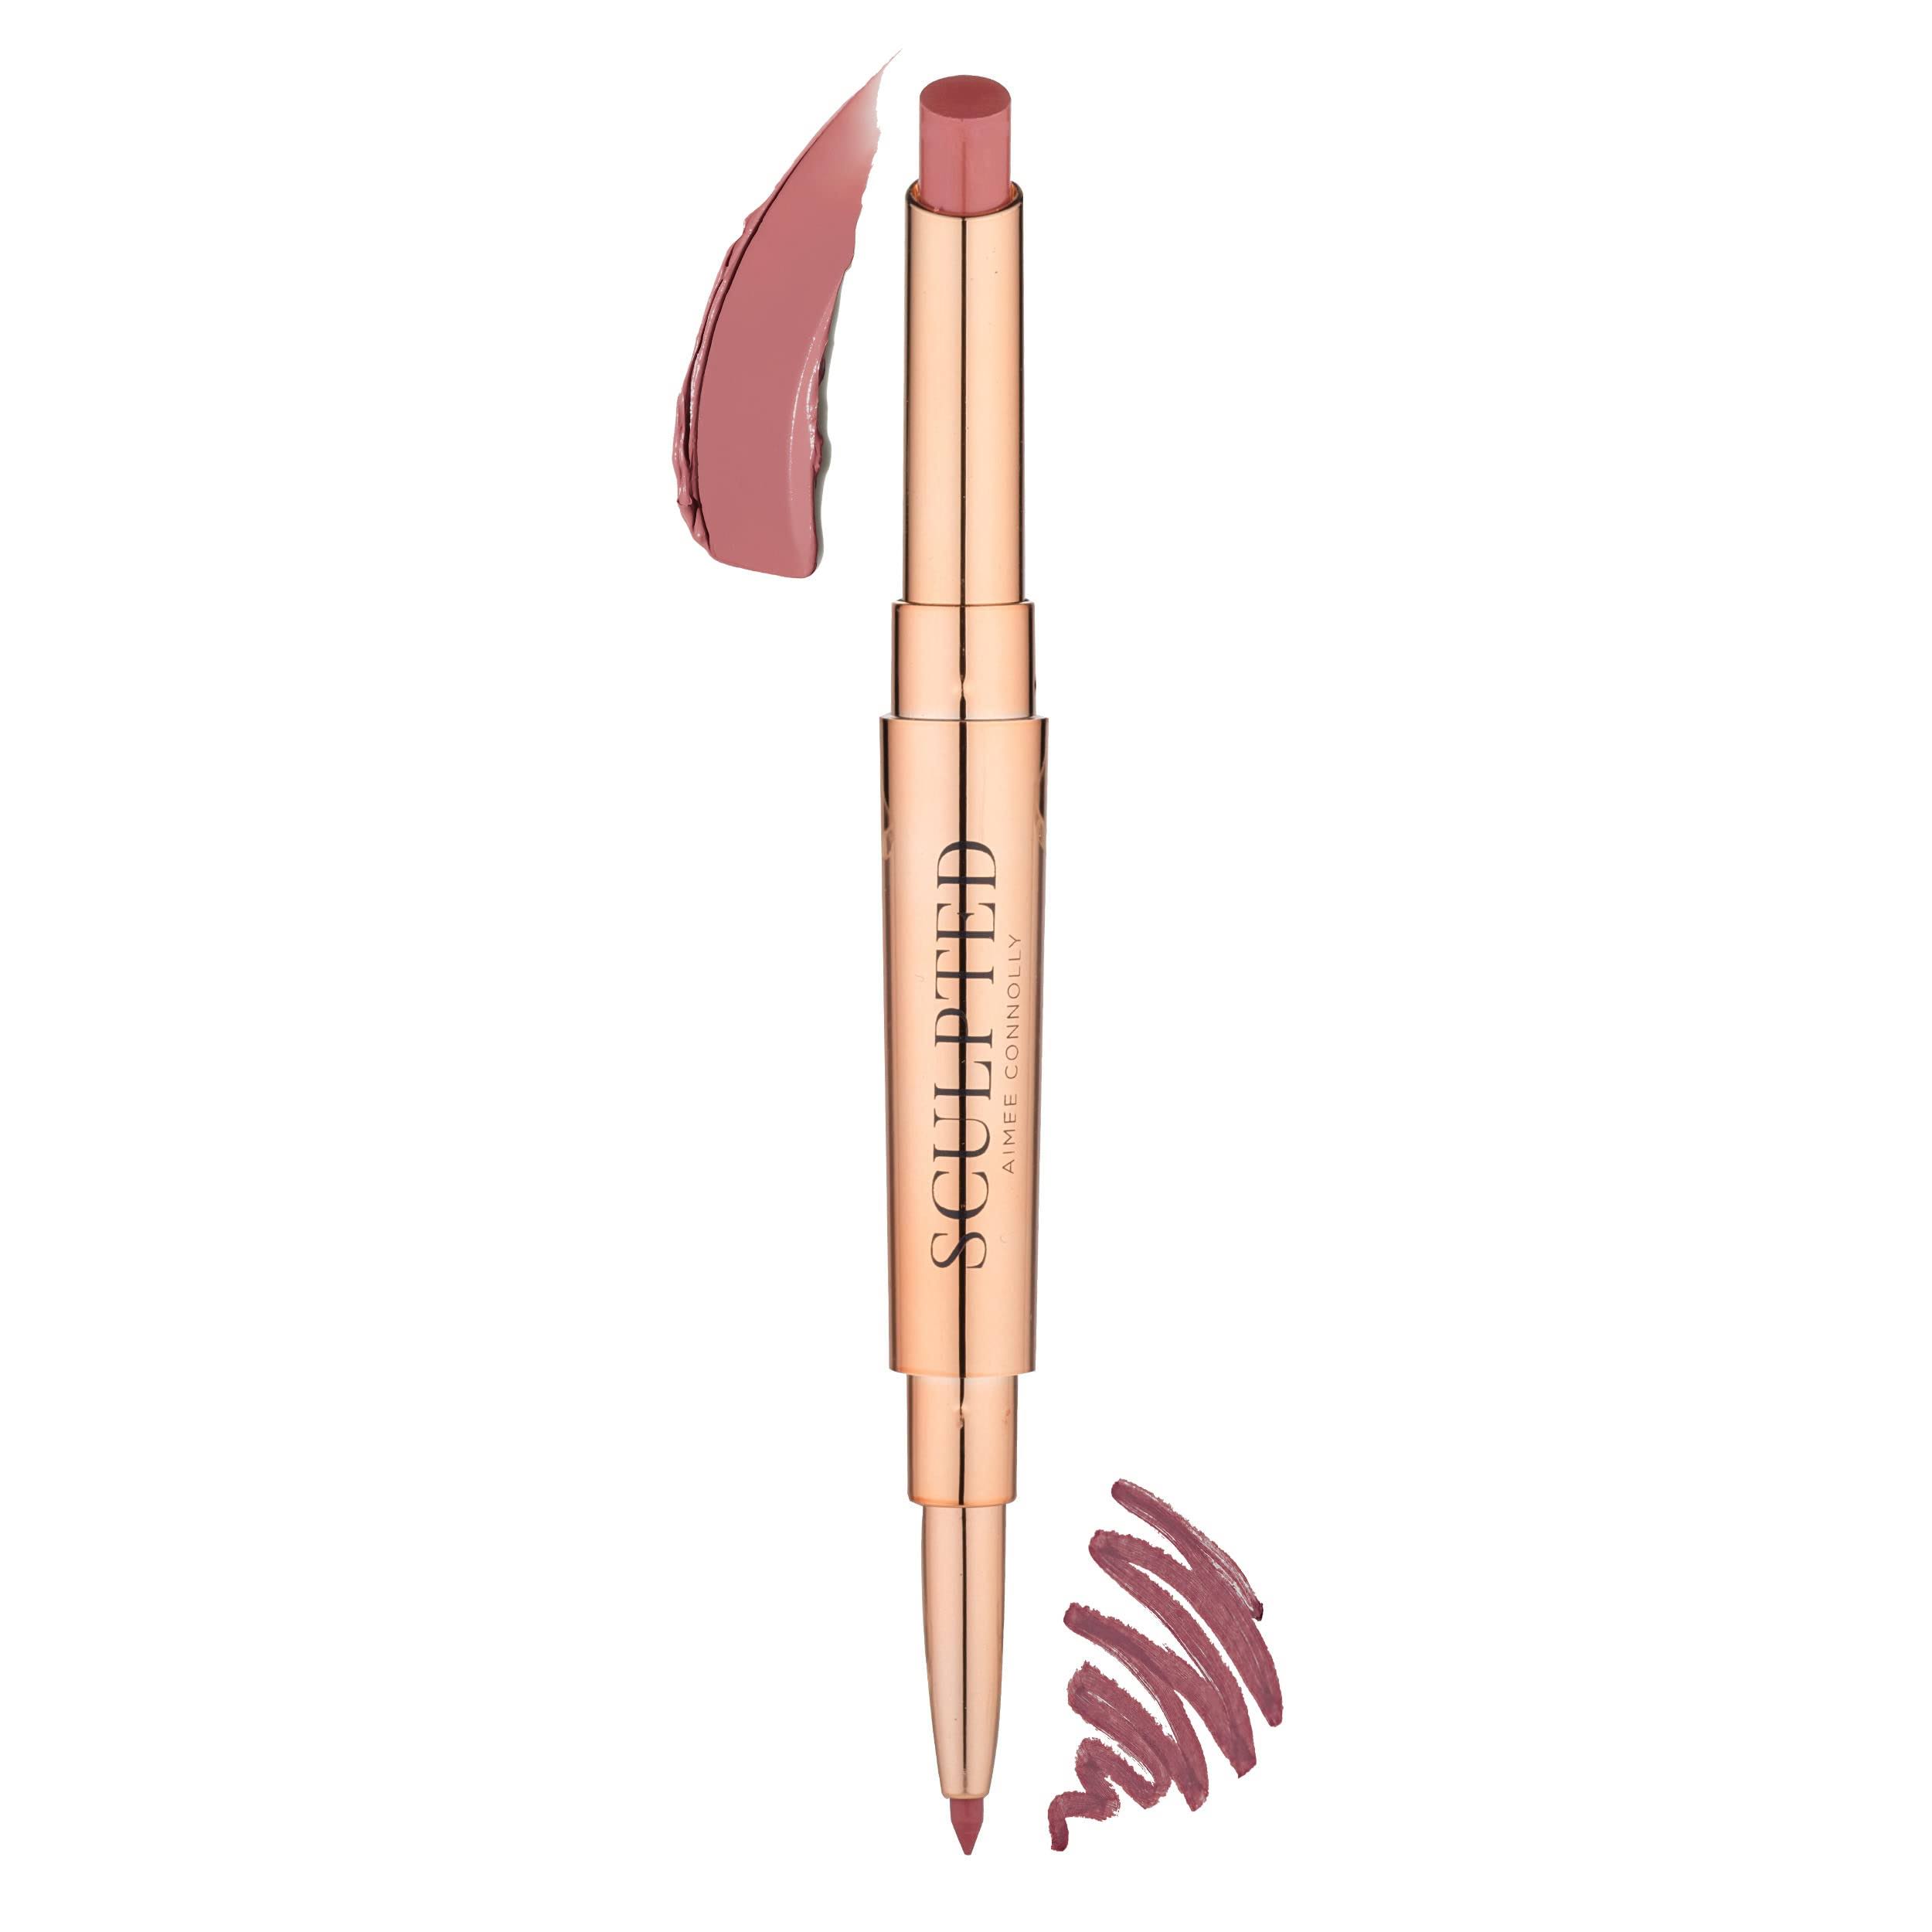 Sculpted by Aimee Lip Duos - Mauve Match 4.5g